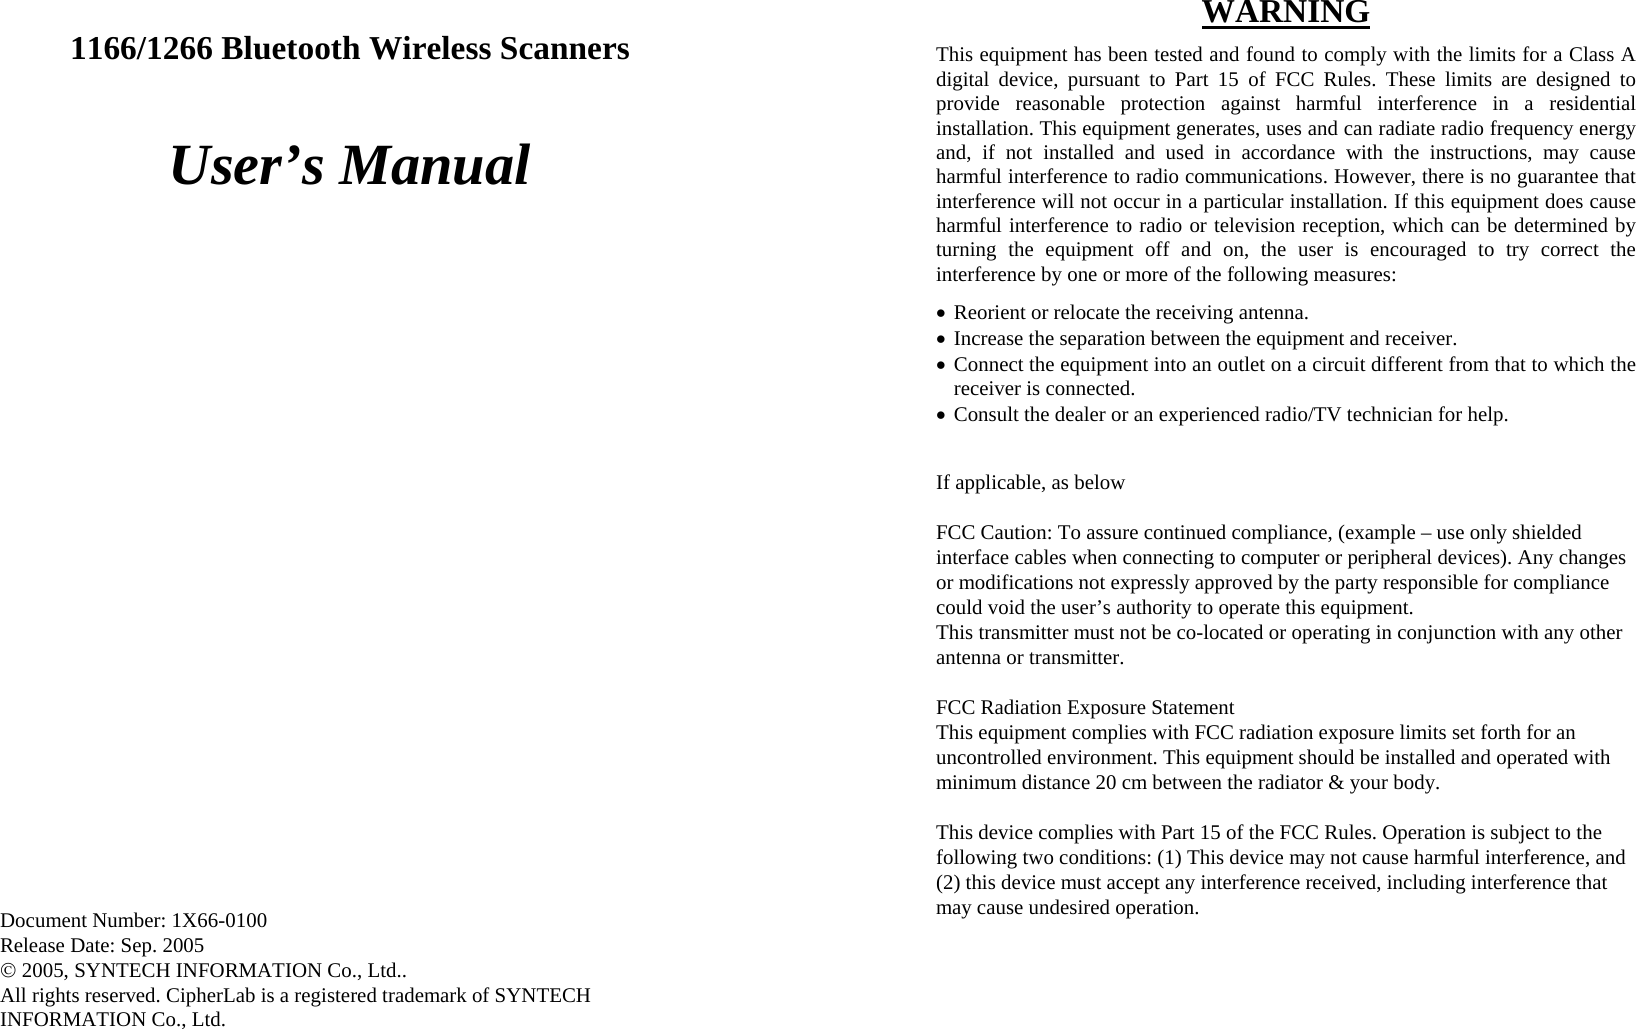  1166/1266 Bluetooth Wireless Scanners  User’s Manual                             Document Number: 1X66-0100 Release Date: Sep. 2005 © 2005, SYNTECH INFORMATION Co., Ltd.. All rights reserved. CipherLab is a registered trademark of SYNTECH INFORMATION Co., Ltd.  WARNING This equipment has been tested and found to comply with the limits for a Class A digital device, pursuant to Part 15 of FCC Rules. These limits are designed to provide reasonable protection against harmful interference in a residential installation. This equipment generates, uses and can radiate radio frequency energy and, if not installed and used in accordance with the instructions, may cause harmful interference to radio communications. However, there is no guarantee that interference will not occur in a particular installation. If this equipment does cause harmful interference to radio or television reception, which can be determined by turning the equipment off and on, the user is encouraged to try correct the interference by one or more of the following measures: • Reorient or relocate the receiving antenna. • Increase the separation between the equipment and receiver. • Connect the equipment into an outlet on a circuit different from that to which the receiver is connected. • Consult the dealer or an experienced radio/TV technician for help.  If applicable, as below  FCC Caution: To assure continued compliance, (example – use only shielded interface cables when connecting to computer or peripheral devices). Any changes or modifications not expressly approved by the party responsible for compliance could void the user’s authority to operate this equipment. This transmitter must not be co-located or operating in conjunction with any other antenna or transmitter.  FCC Radiation Exposure Statement  This equipment complies with FCC radiation exposure limits set forth for an uncontrolled environment. This equipment should be installed and operated with minimum distance 20 cm between the radiator &amp; your body.  This device complies with Part 15 of the FCC Rules. Operation is subject to the following two conditions: (1) This device may not cause harmful interference, and (2) this device must accept any interference received, including interference that may cause undesired operation. 